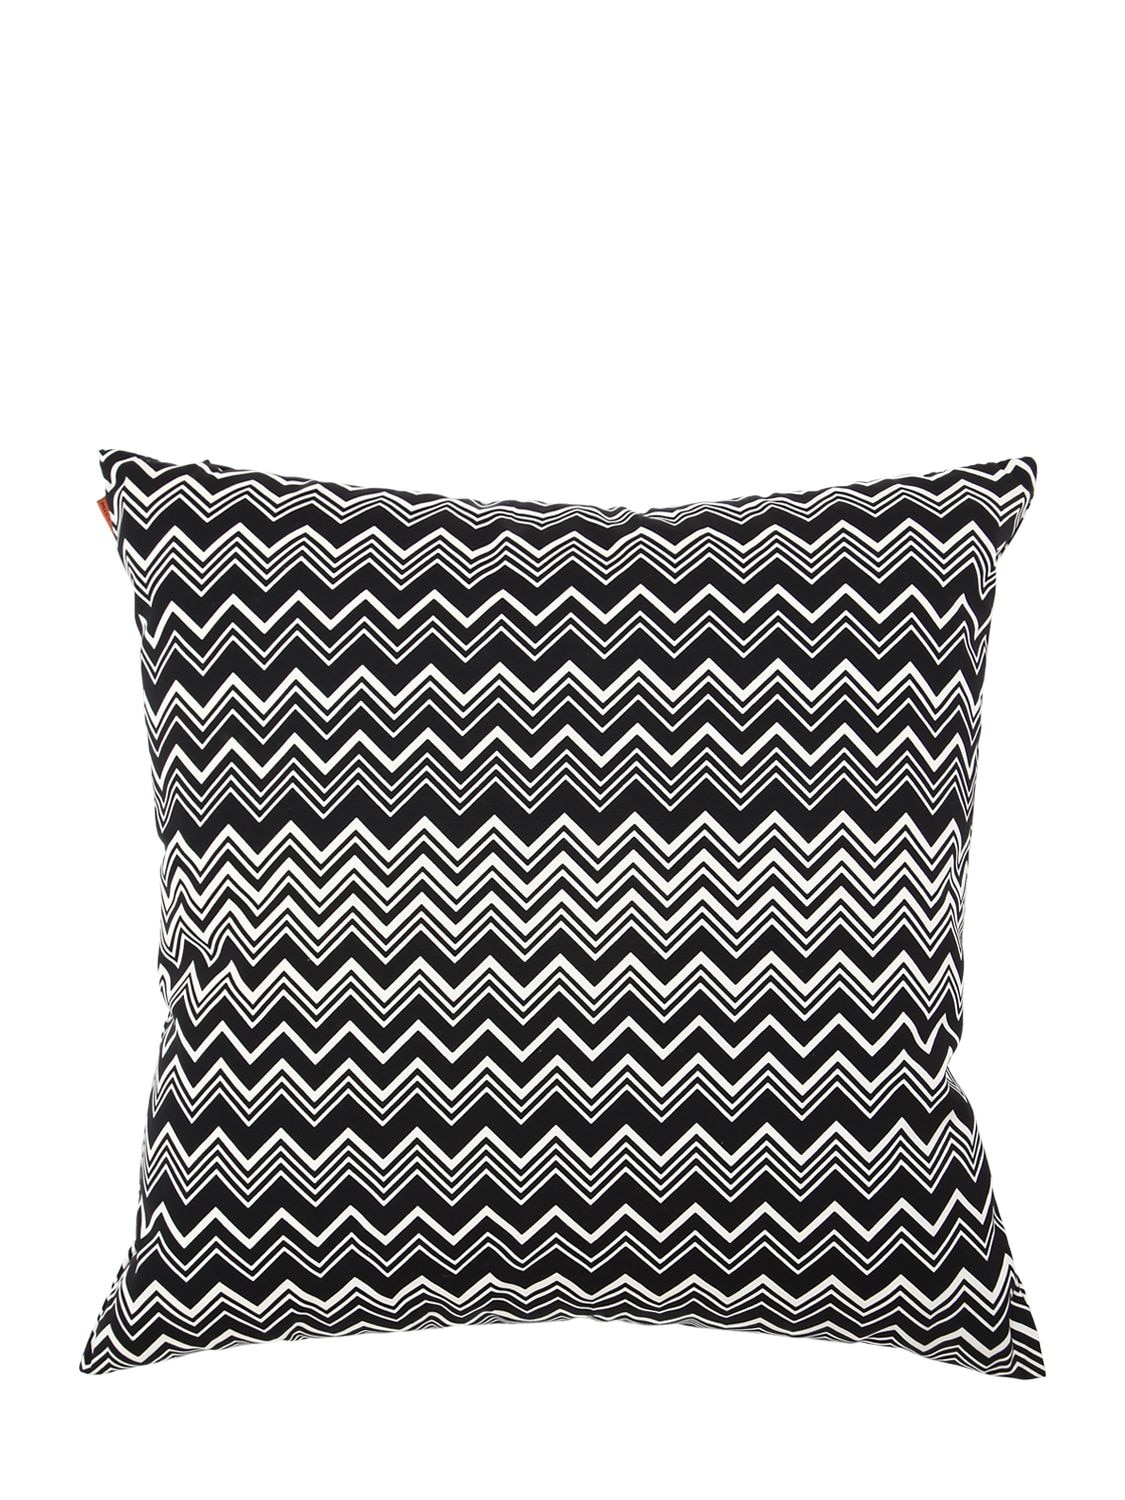 Missoni Home Collection Tobago Printed Cotton Accent Cushion In Black,white